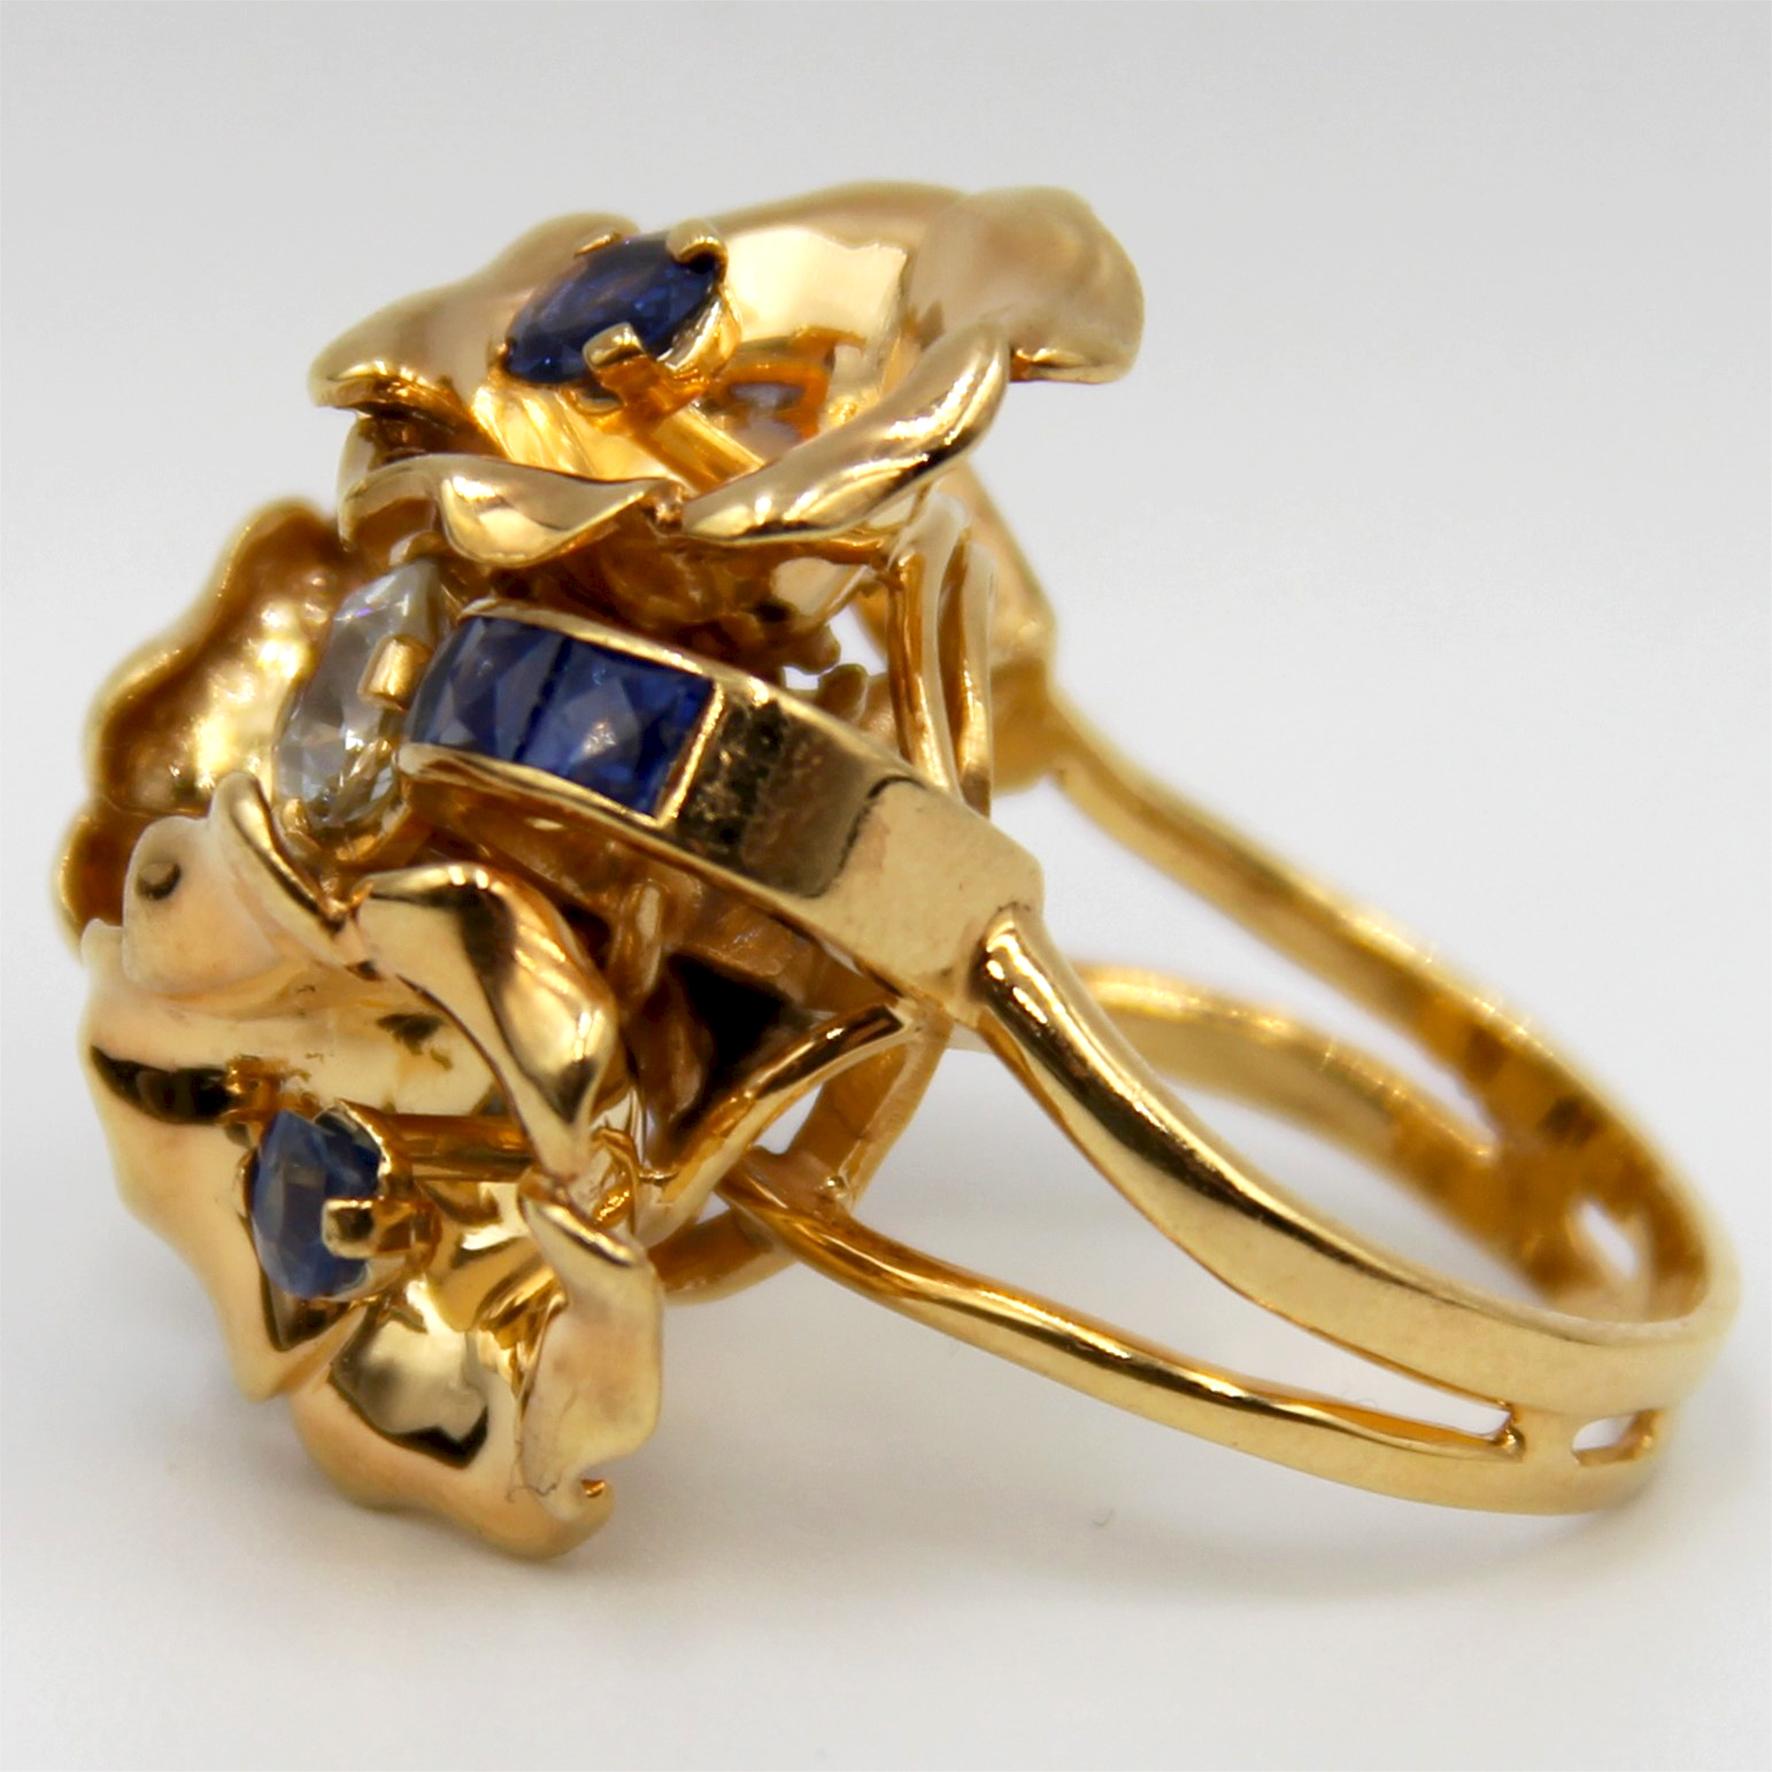 This excellent design is from 1920's France. It's with Sapphires and in centre 0.75 carats of Old European Cut Diamond.